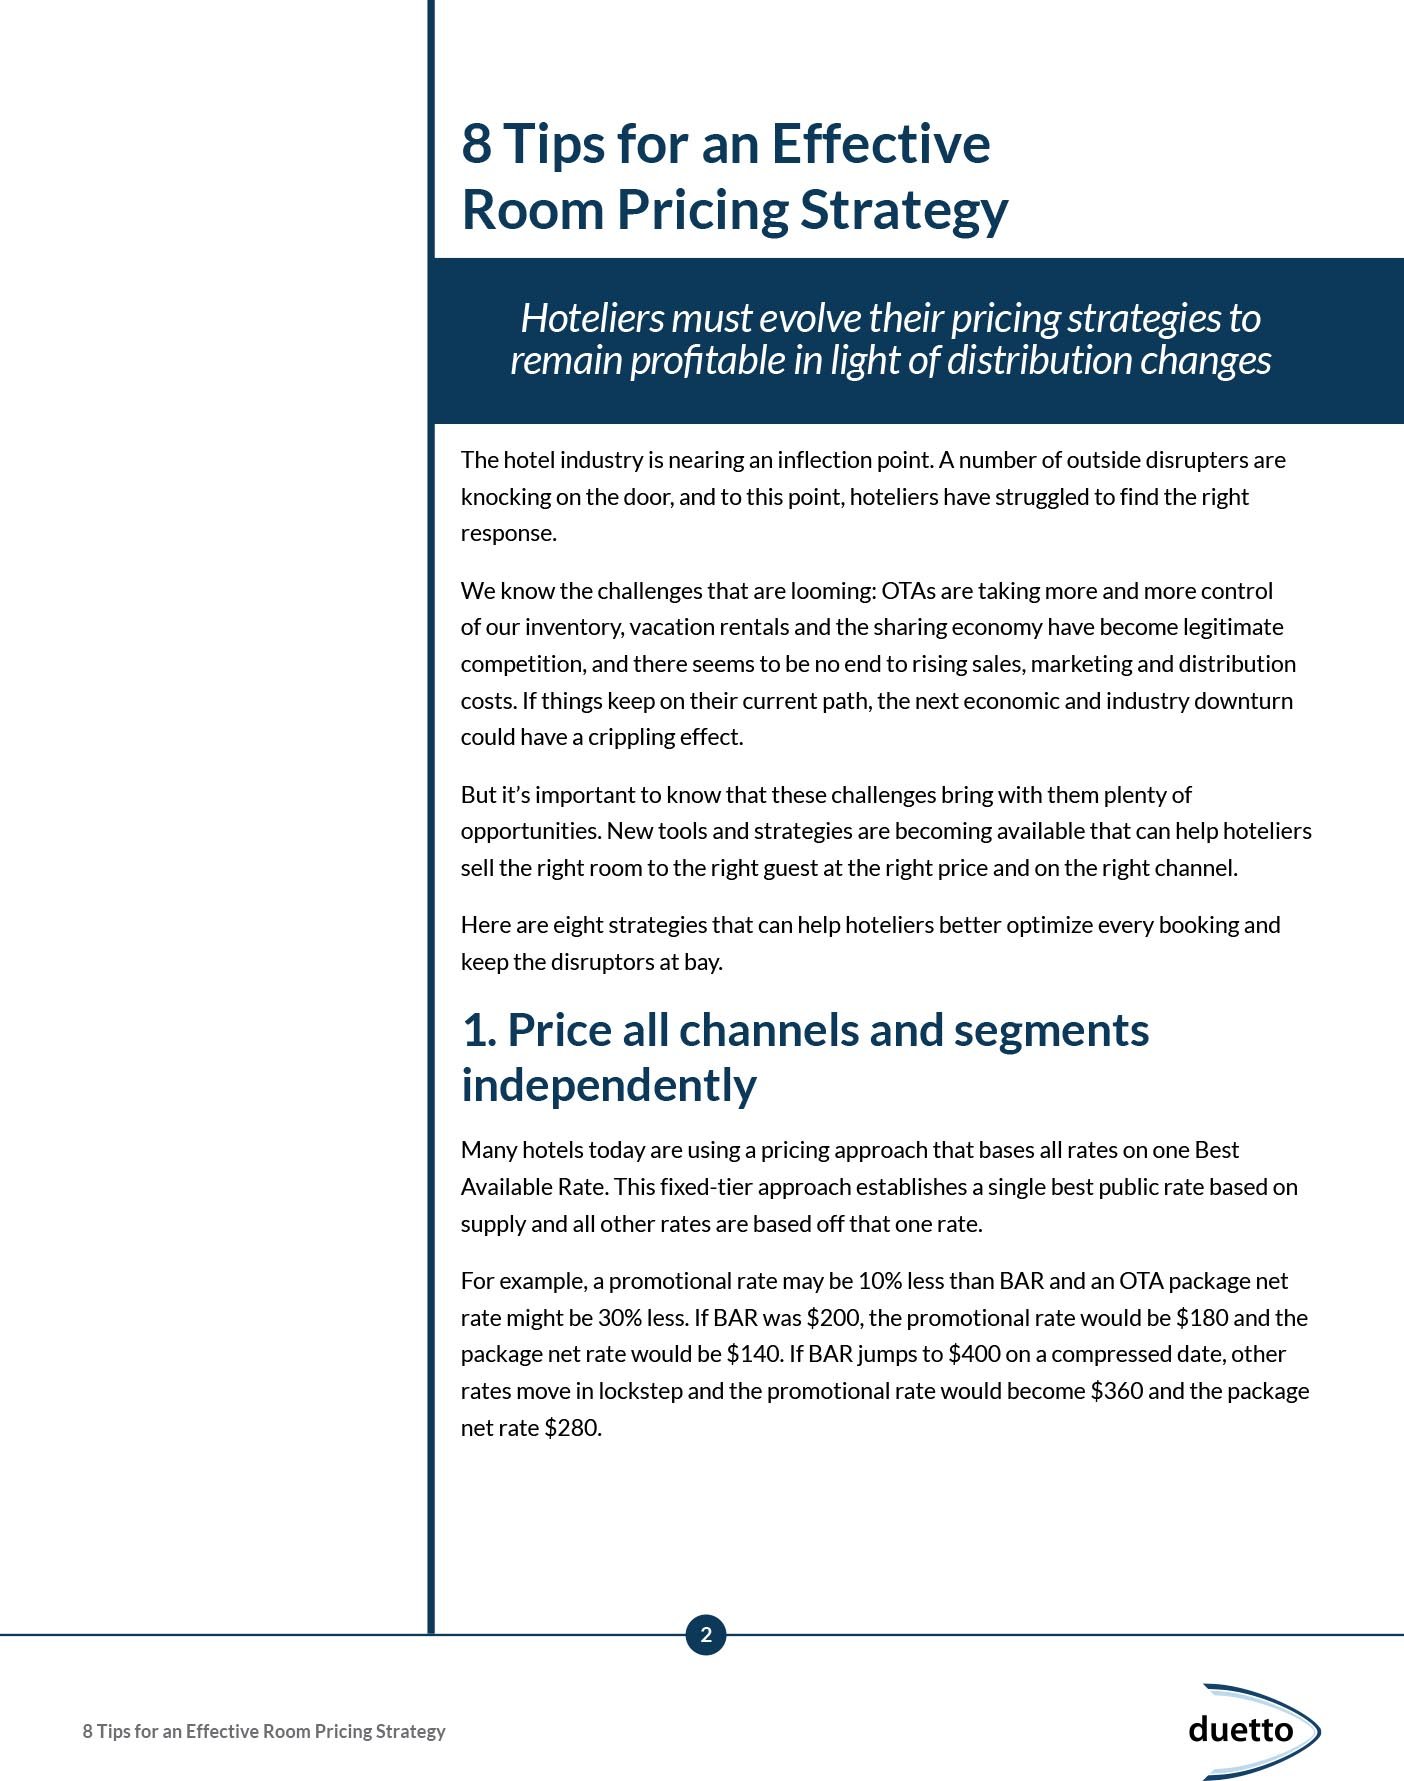 2 8-Tips-Effective-Pricing-Strategy-2.jpg